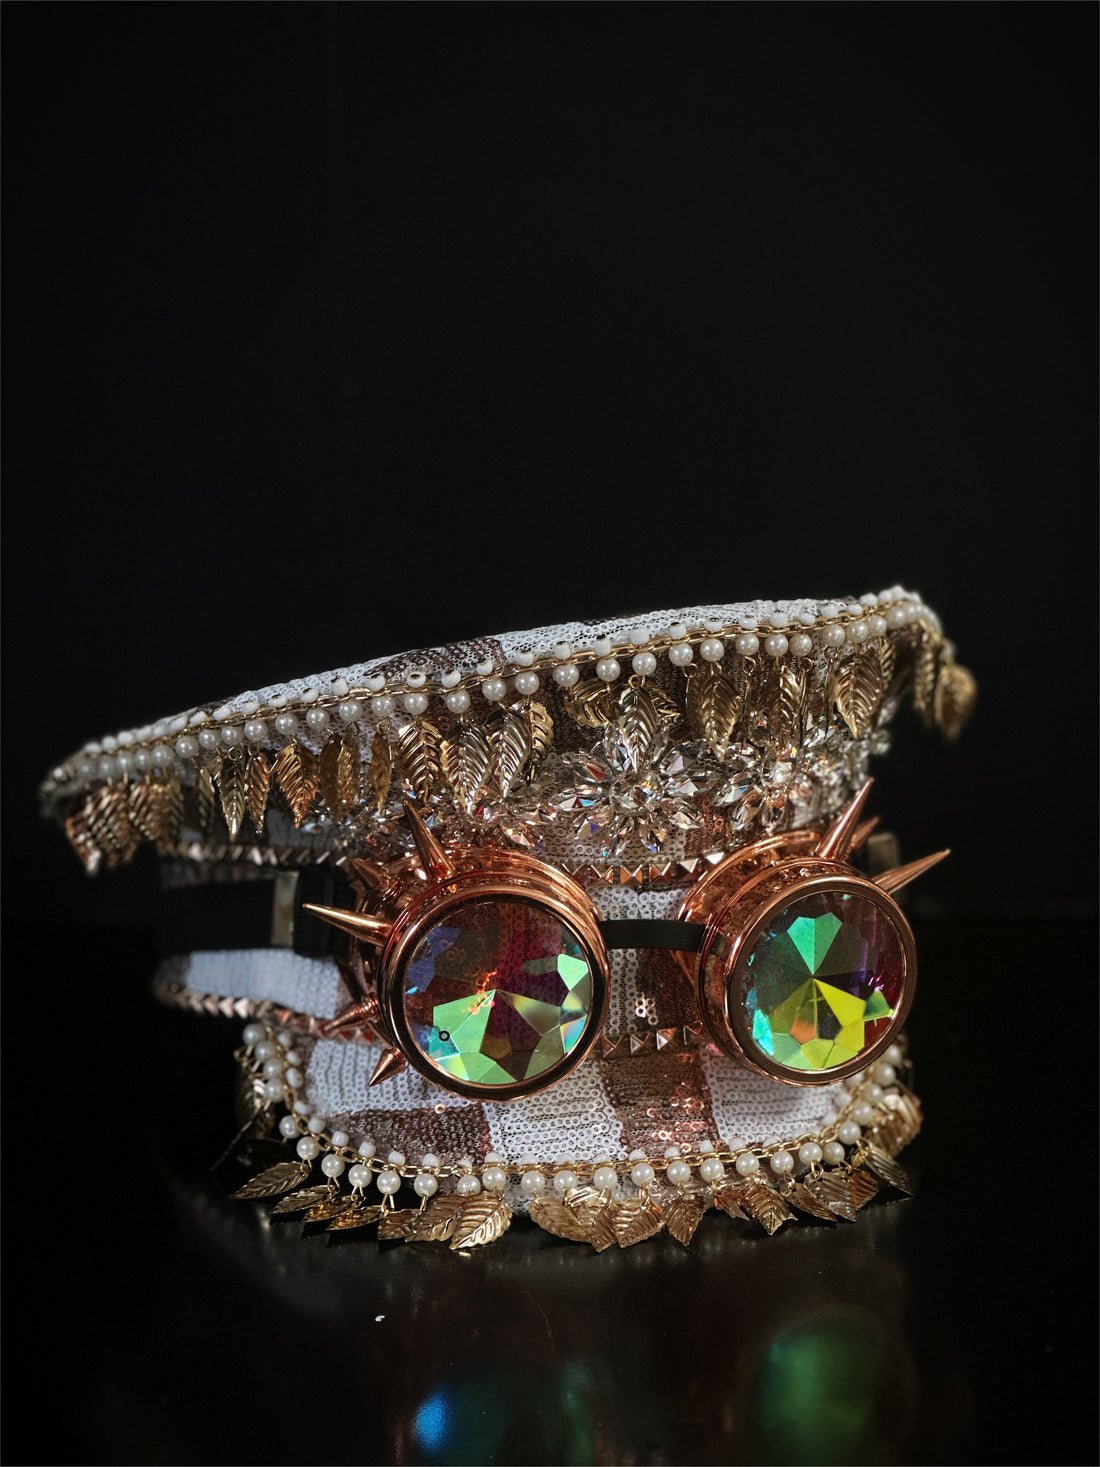 Captain hat in rose gold and white with spiked rose gold goggles.